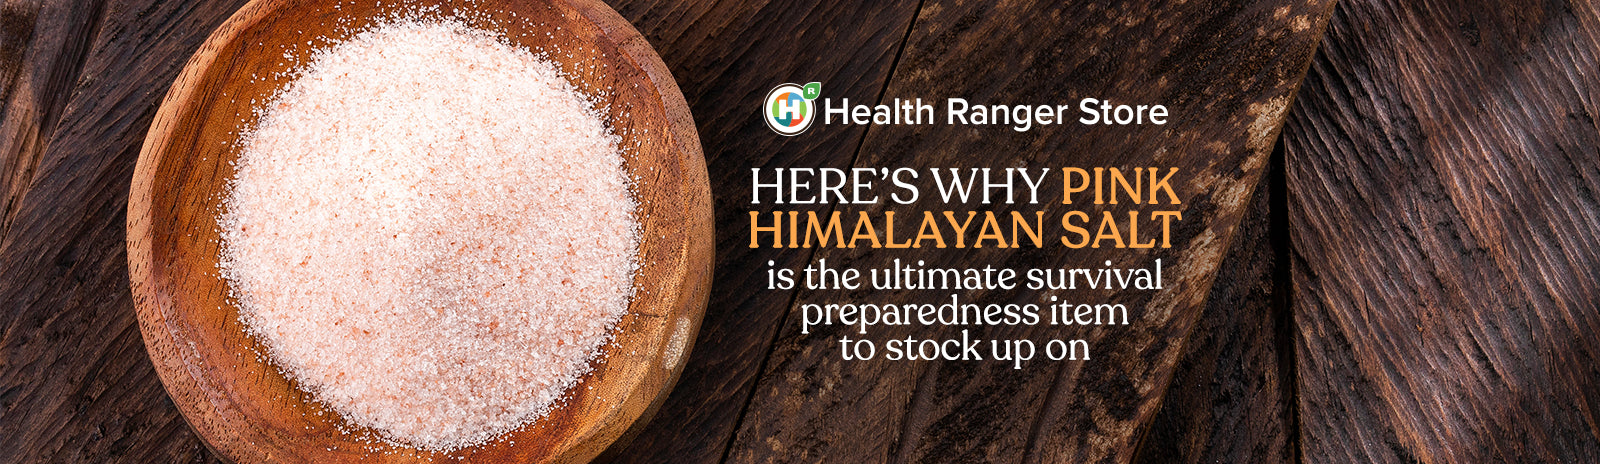 Here’s why Pink Himalayan Salt is the ultimate survival preparedness item to stock up on